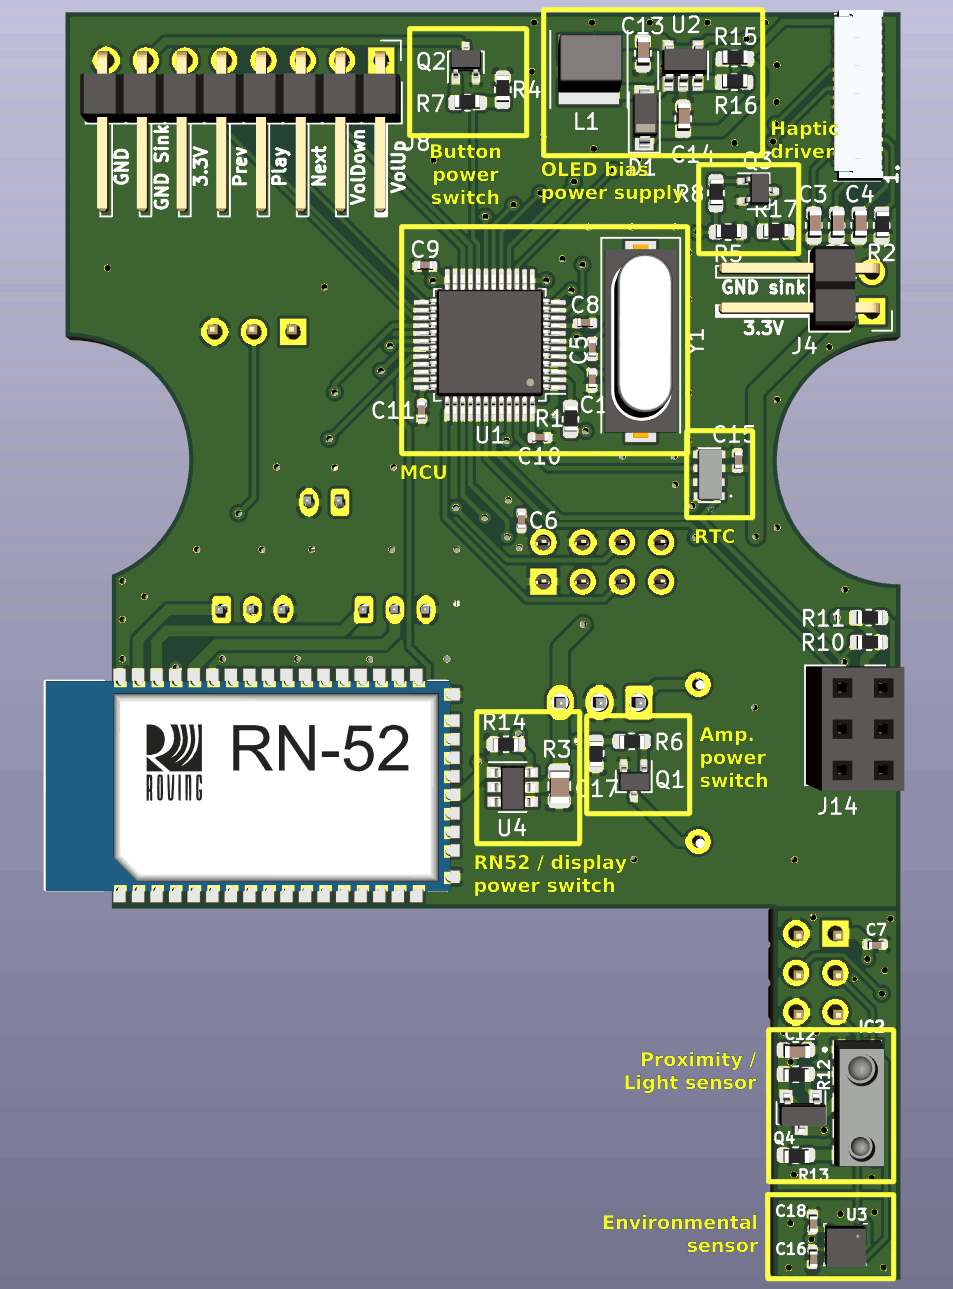 PCB Labeled